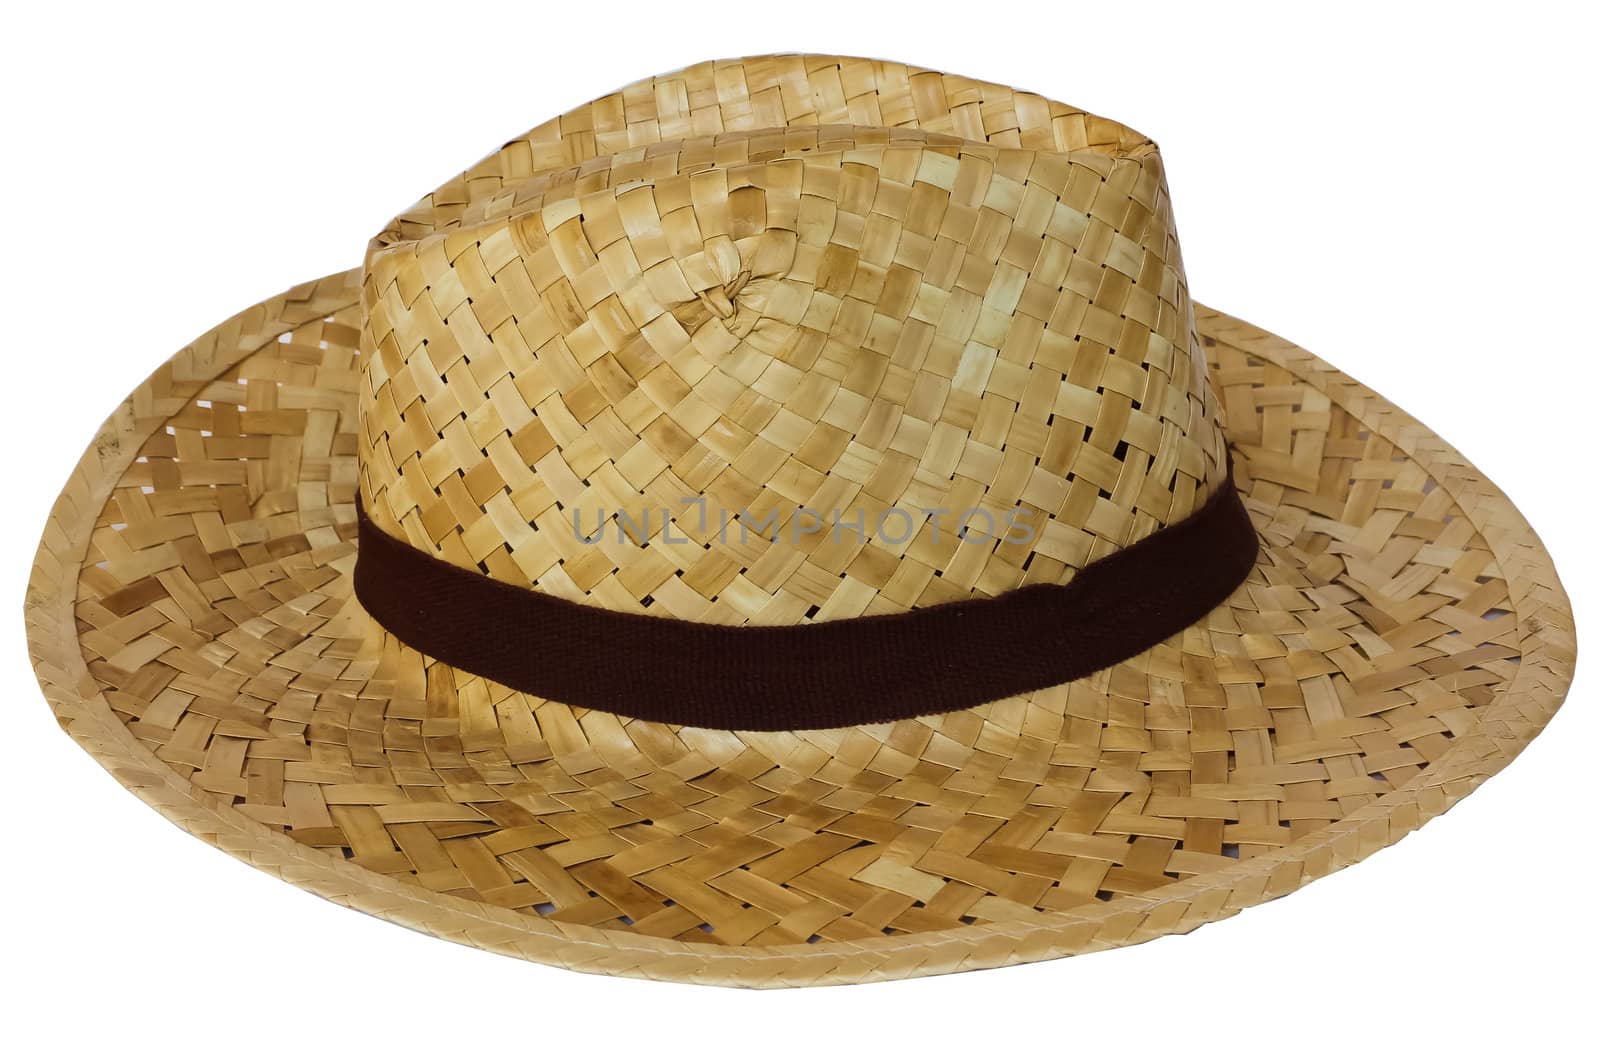 Woven Hat on white background. by sutipp11